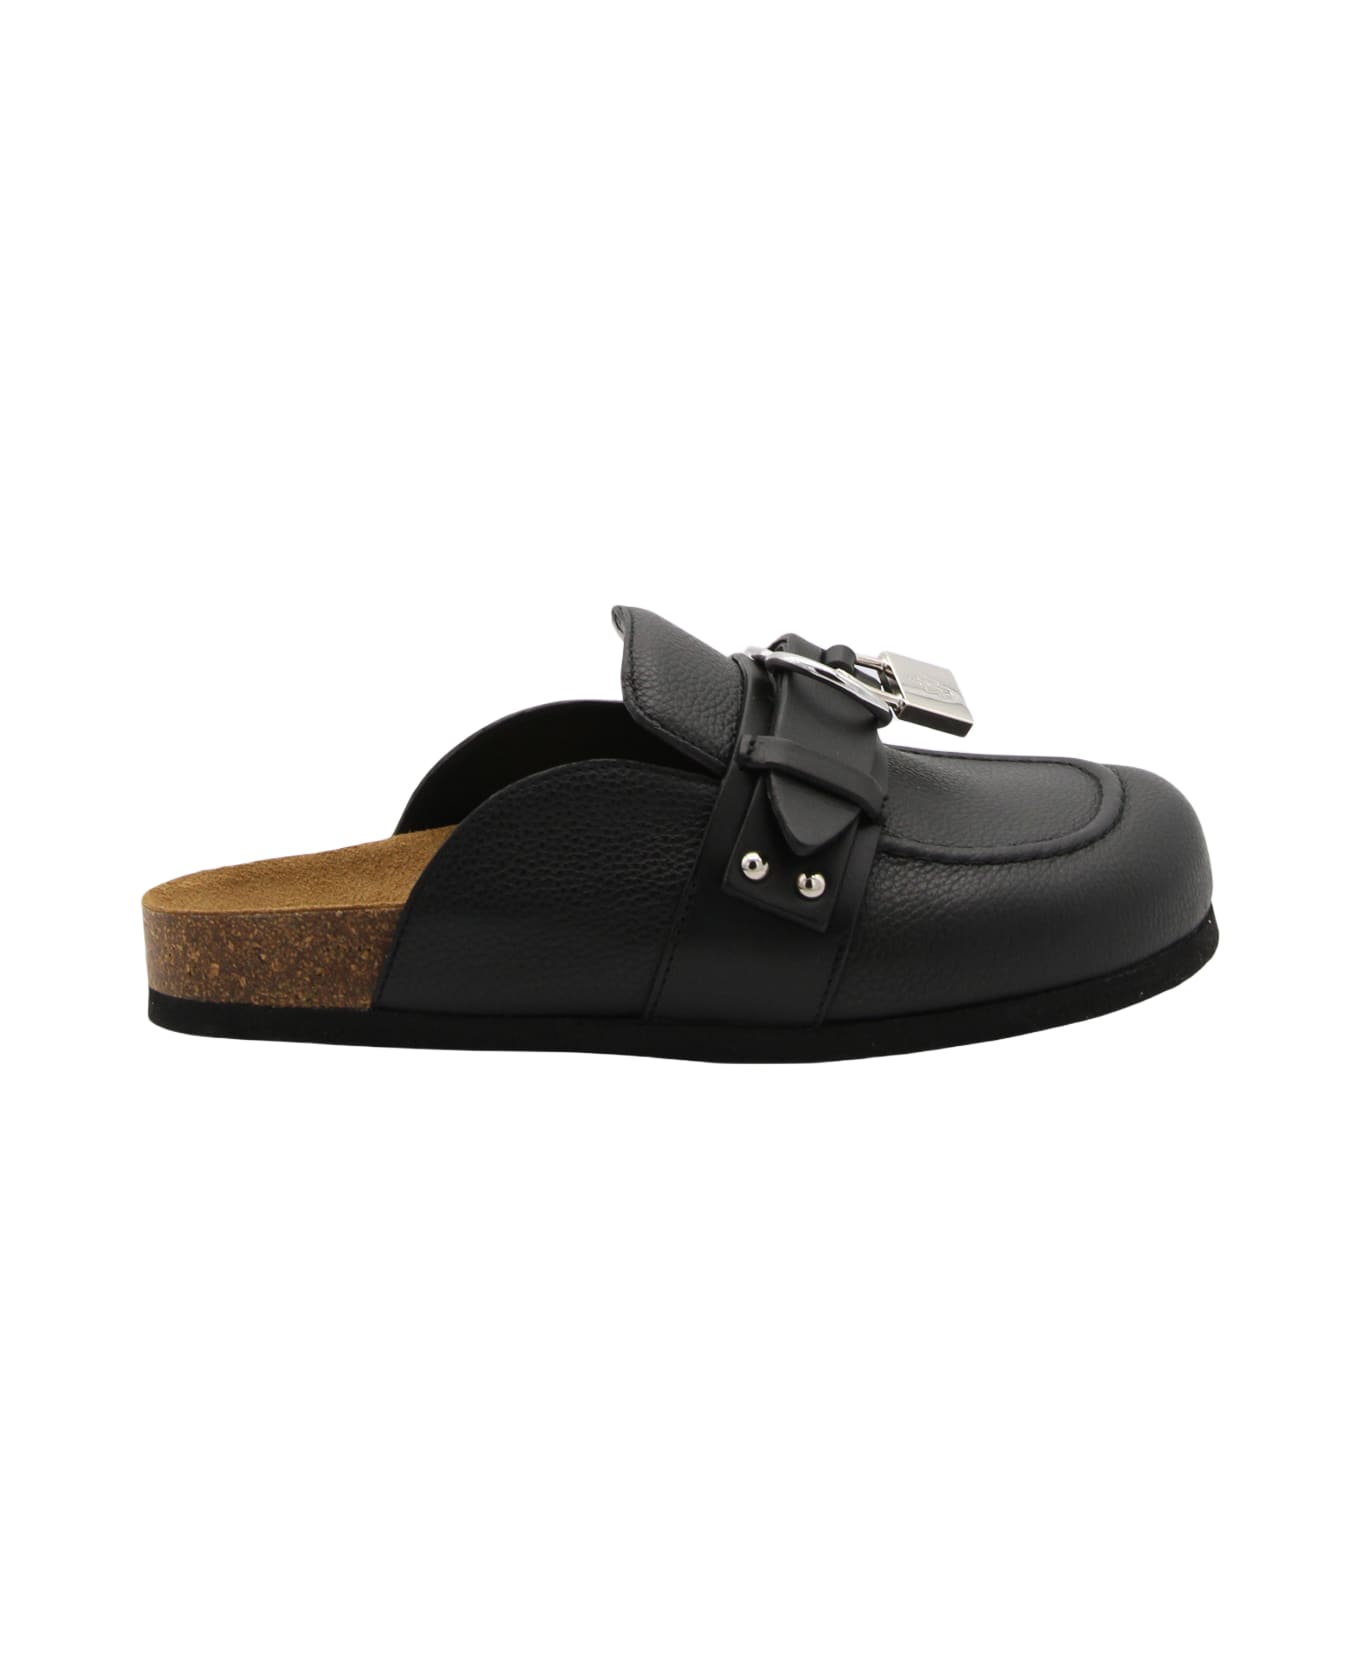 J.W. Anderson Black Leather Gourmet Chain Flats - Black